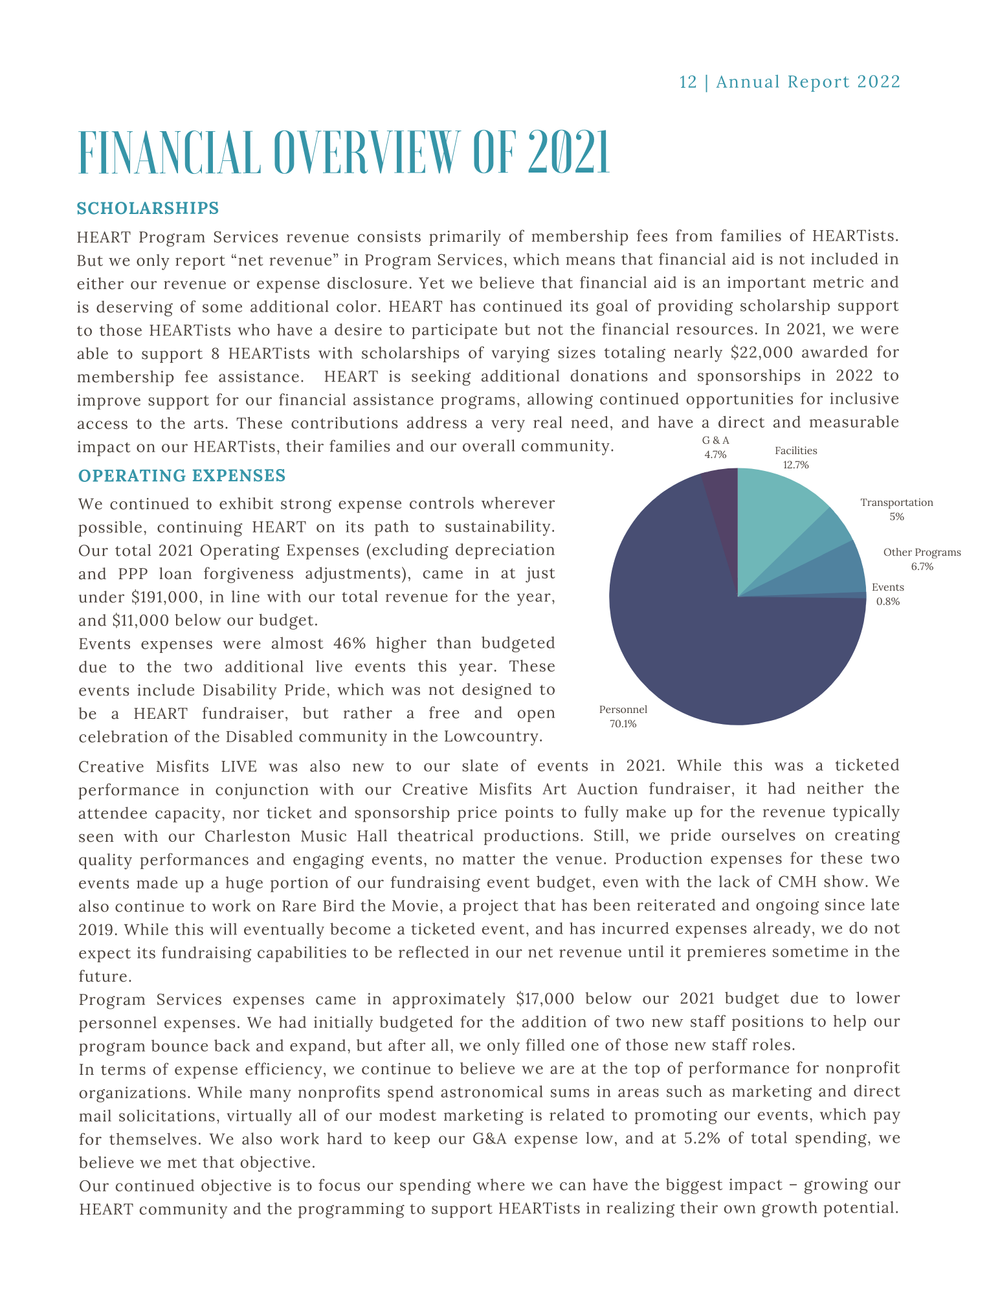 Financial Overview of 2021 (Continued)